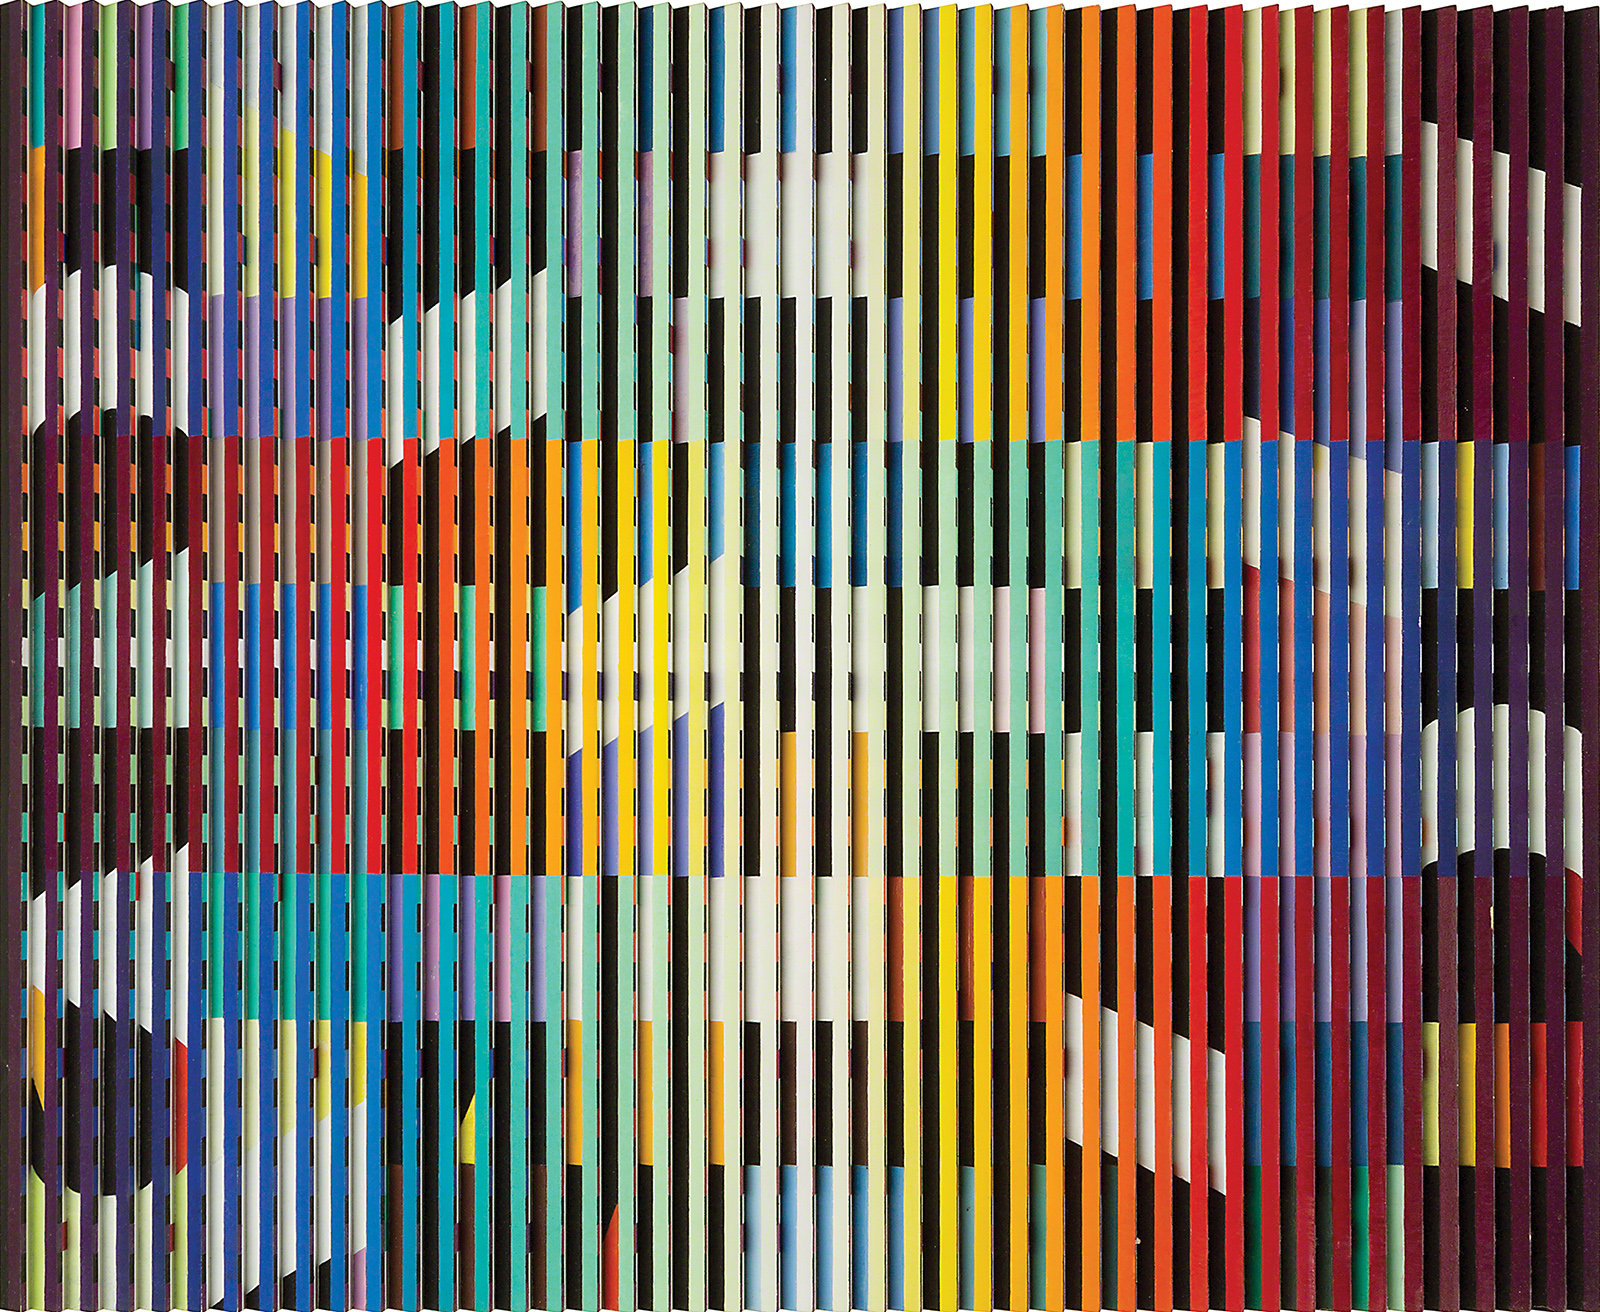 <p>Yaacov Agam.</p>
<p>From Birth to Eternity.</p>
<p>Oil on angled aluminum on wood. 32 x 36 inches. Paris, 1969-72.</p>
<p>Sold at auction 14th December, 2016.</p>
<p>Hammer-price: $152,000.</p>